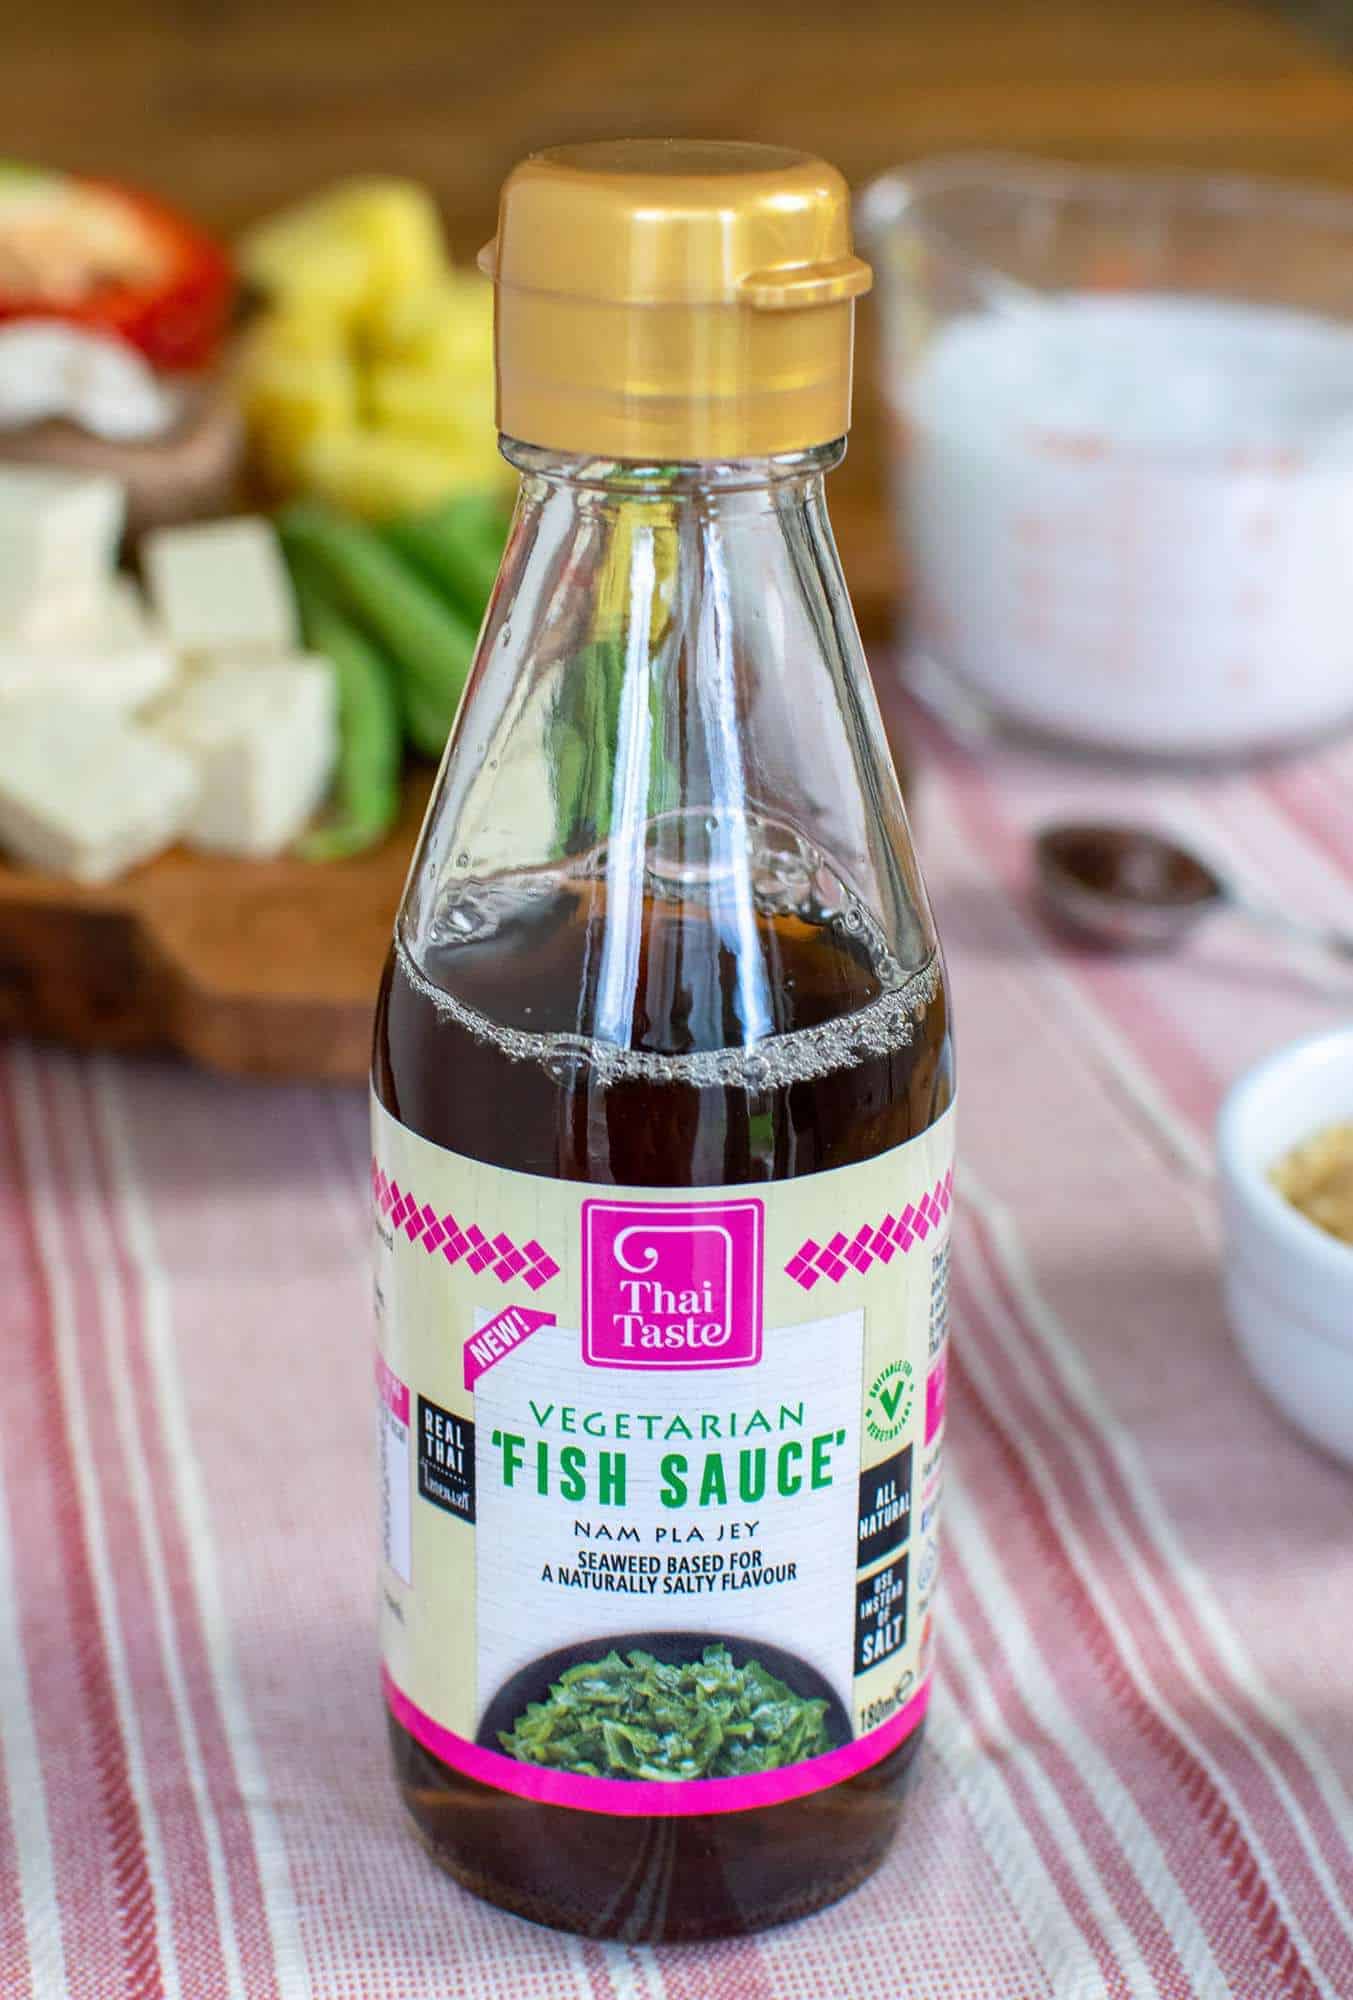 A bottle of vegan fish sauce in front of a tray full of ingredients.